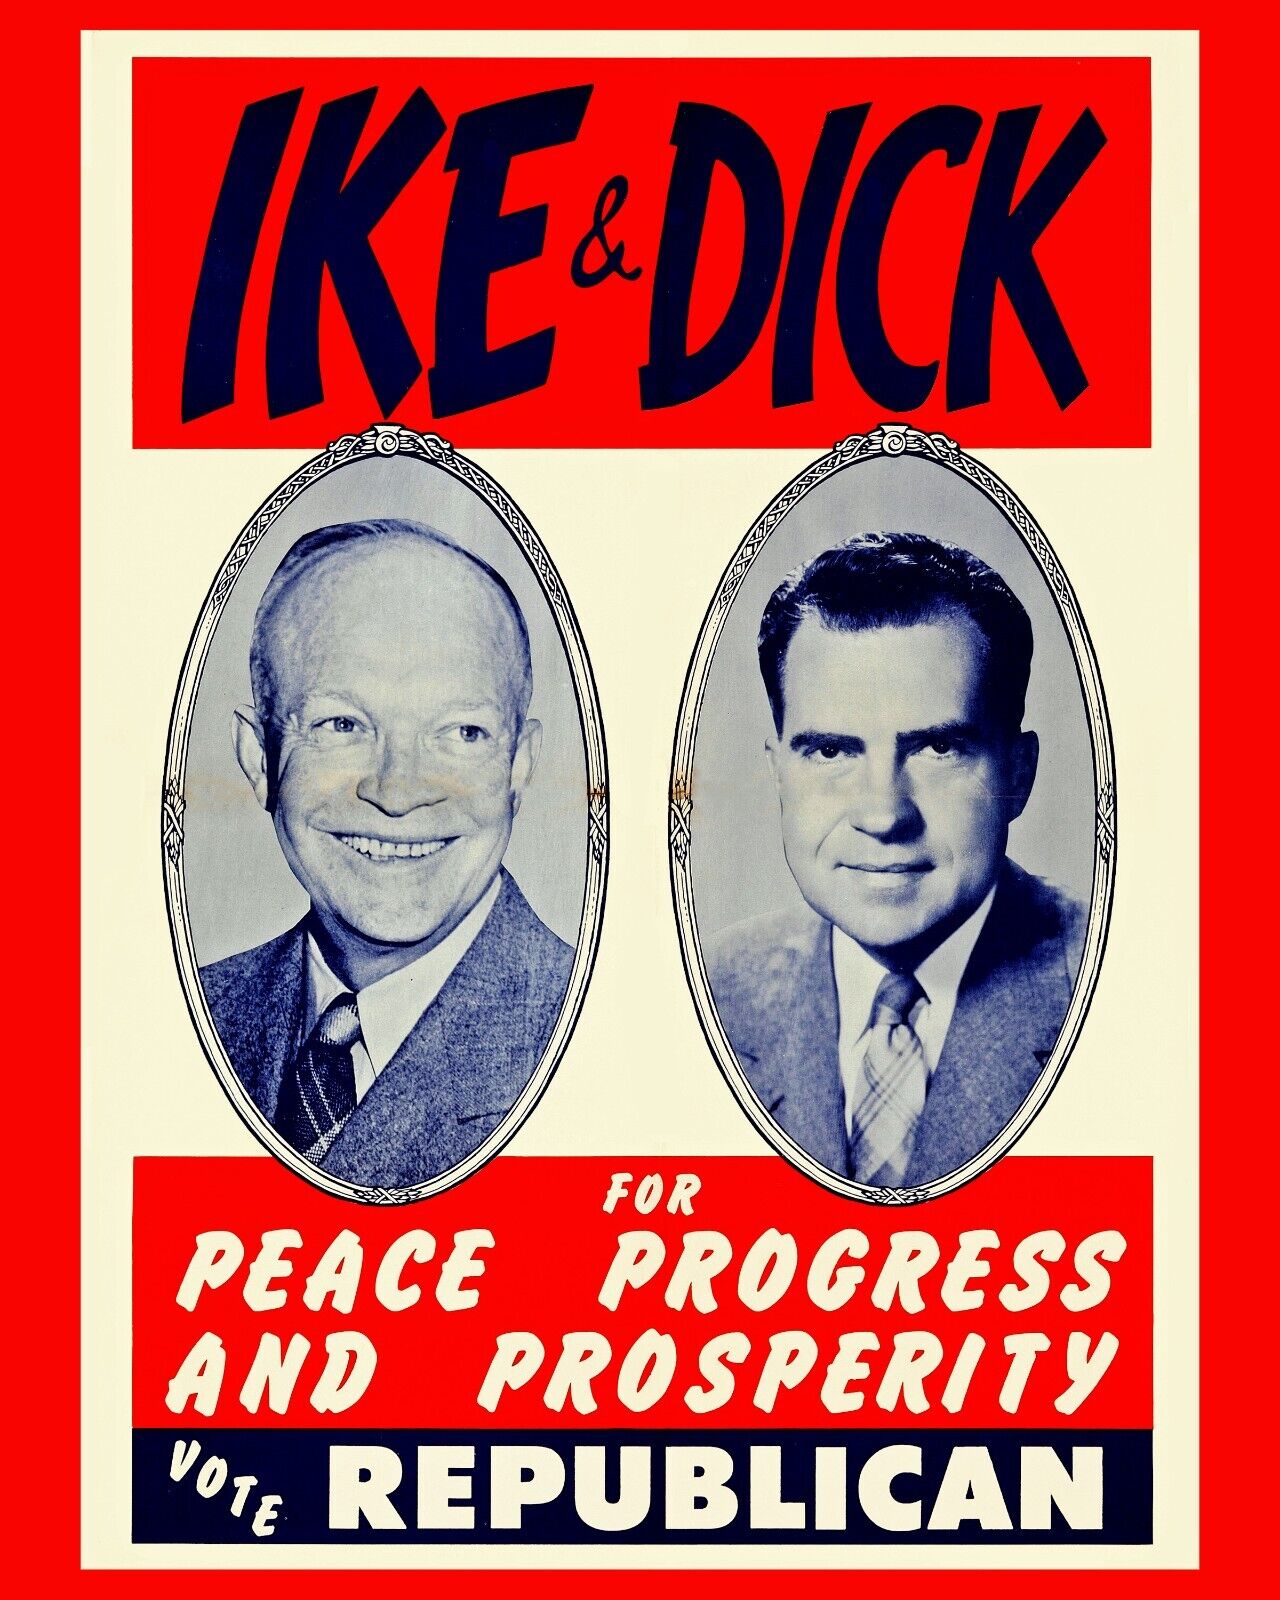 IKE & DICK US Federal Election Poster (1956) - 8x10 Color Photo